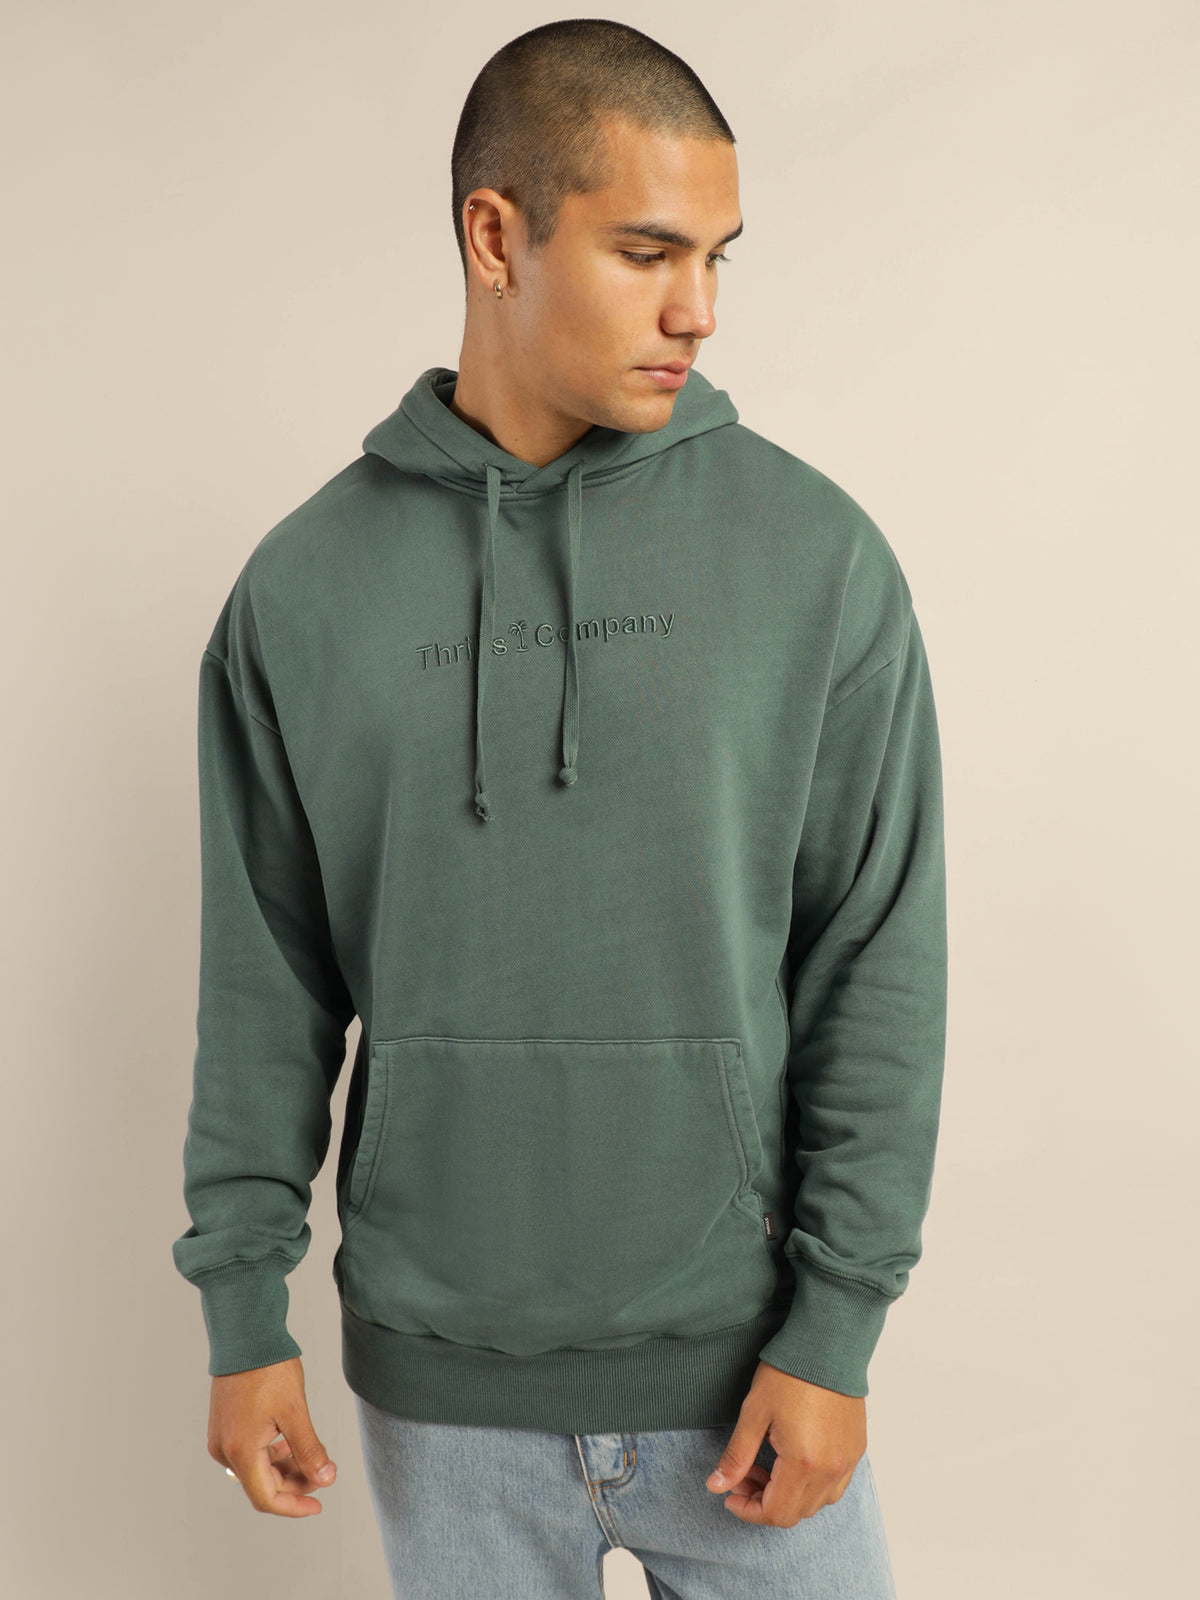 Tonal Company Slouch Hood in Vintage Teal